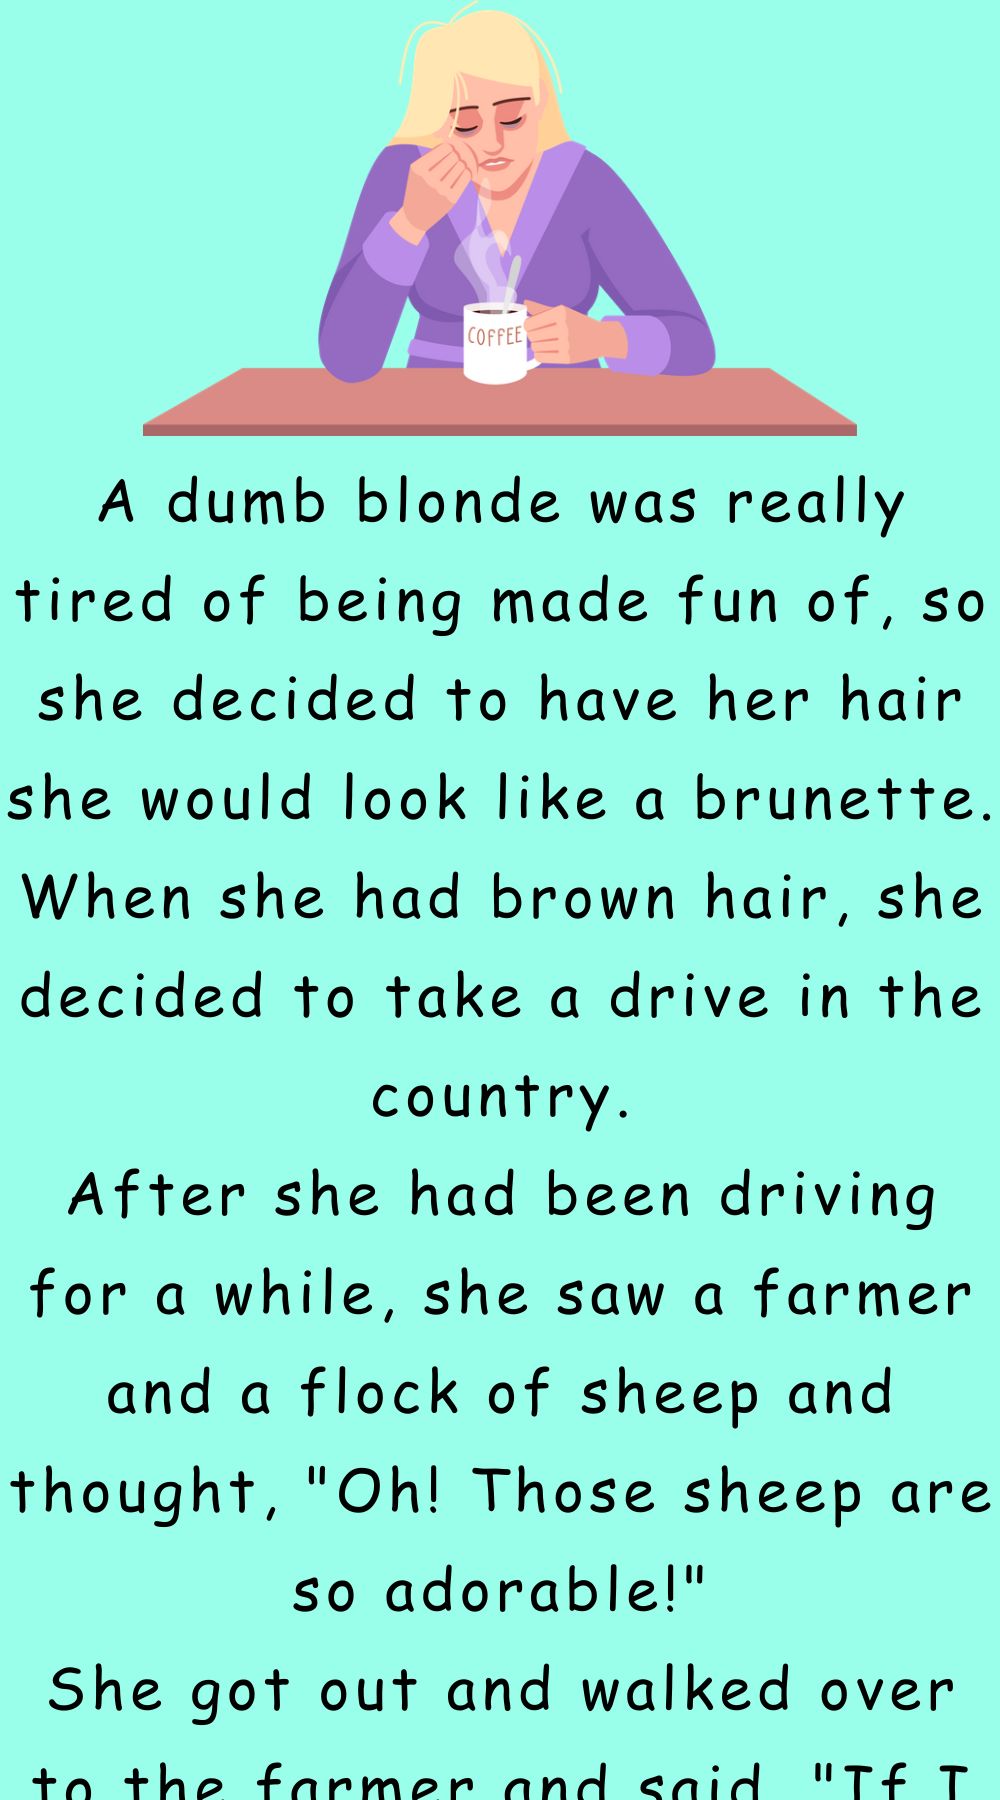 A dumb blonde was really tired of being made fun 